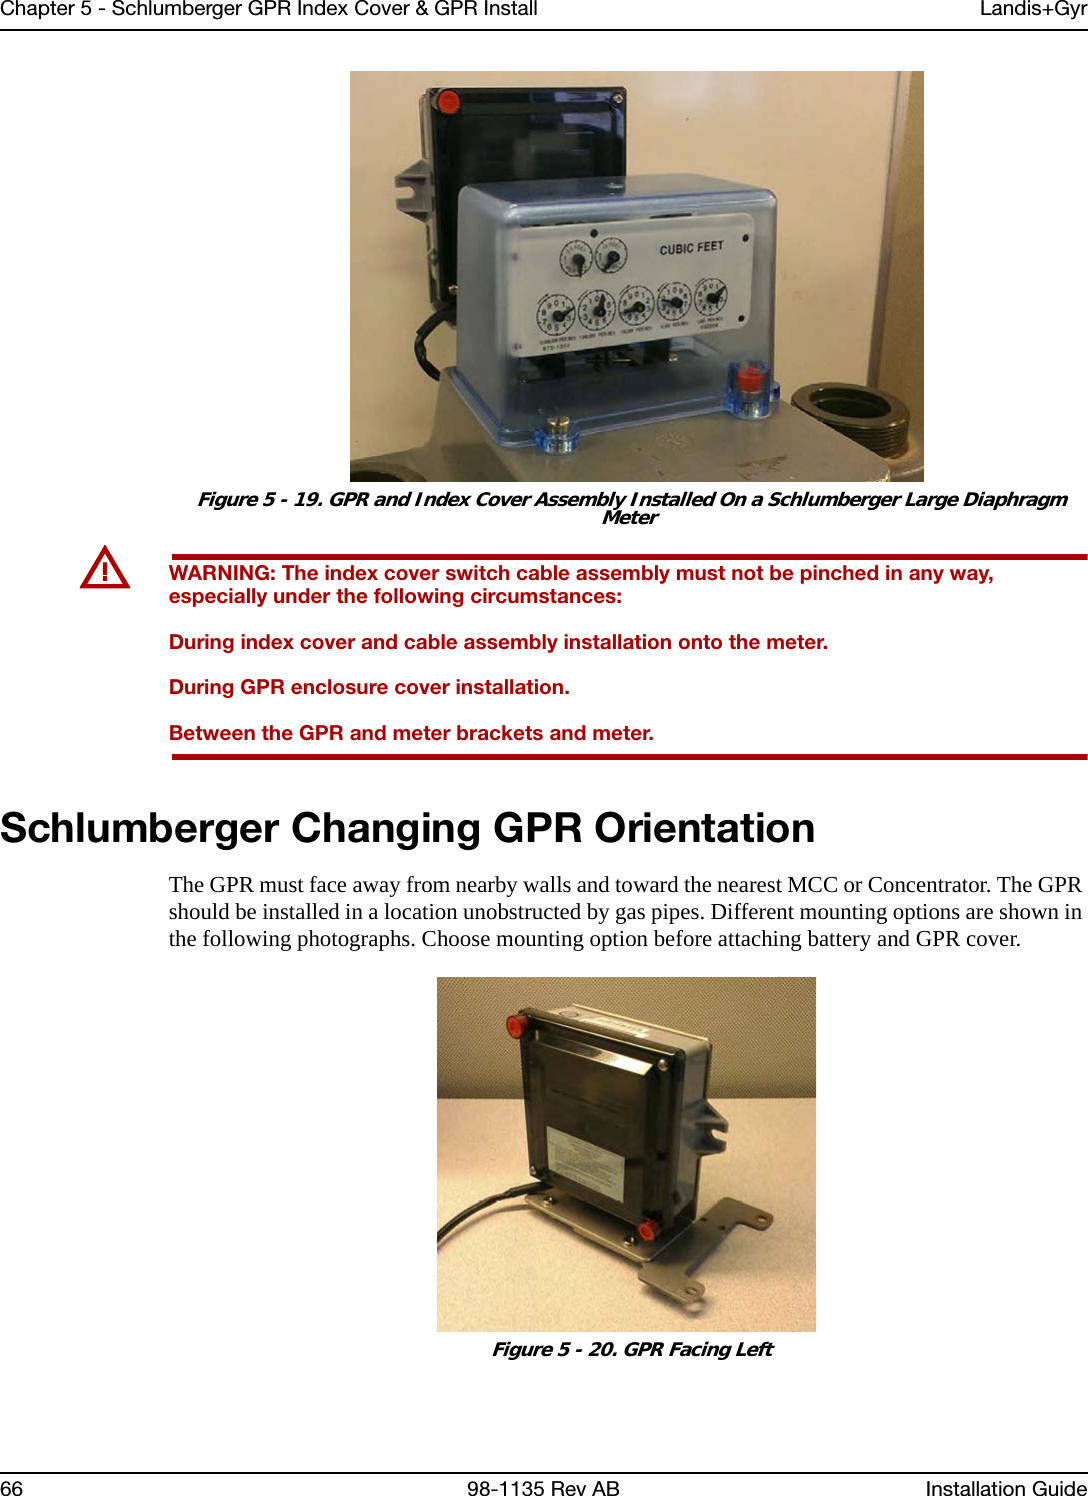 Chapter 5 - Schlumberger GPR Index Cover &amp; GPR Install Landis+Gyr66 98-1135 Rev AB Installation Guide Figure 5 - 19. GPR and Index Cover Assembly Installed On a Schlumberger Large Diaphragm MeterUWARNING: The index cover switch cable assembly must not be pinched in any way, especially under the following circumstances:During index cover and cable assembly installation onto the meter.During GPR enclosure cover installation.Between the GPR and meter brackets and meter. Schlumberger Changing GPR OrientationThe GPR must face away from nearby walls and toward the nearest MCC or Concentrator. The GPR should be installed in a location unobstructed by gas pipes. Different mounting options are shown in the following photographs. Choose mounting option before attaching battery and GPR cover. Figure 5 - 20. GPR Facing Left